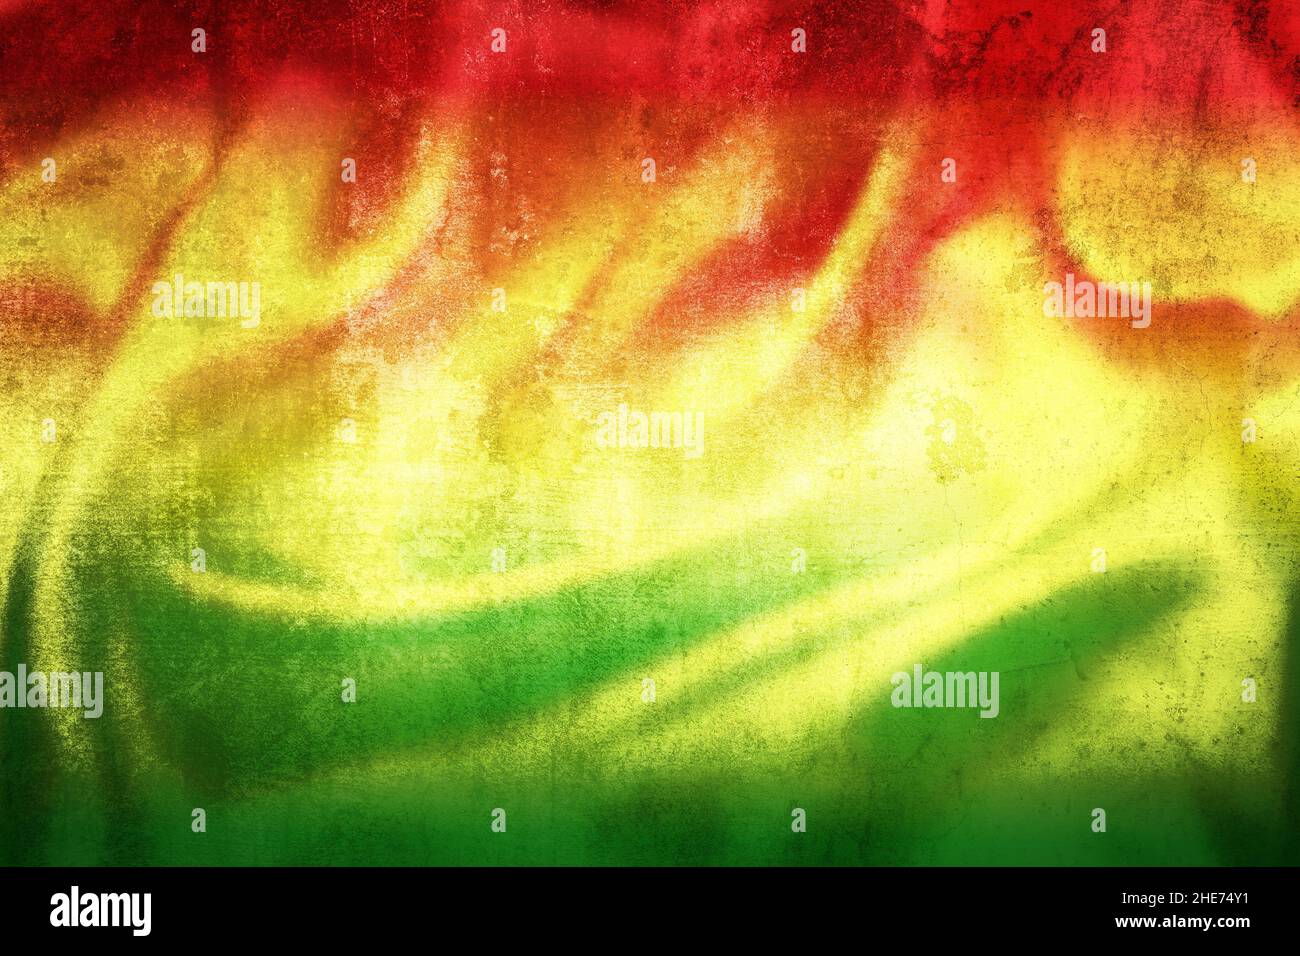 Grunge abstract rastafarian colors background view, red, yellow, green Stock Photo